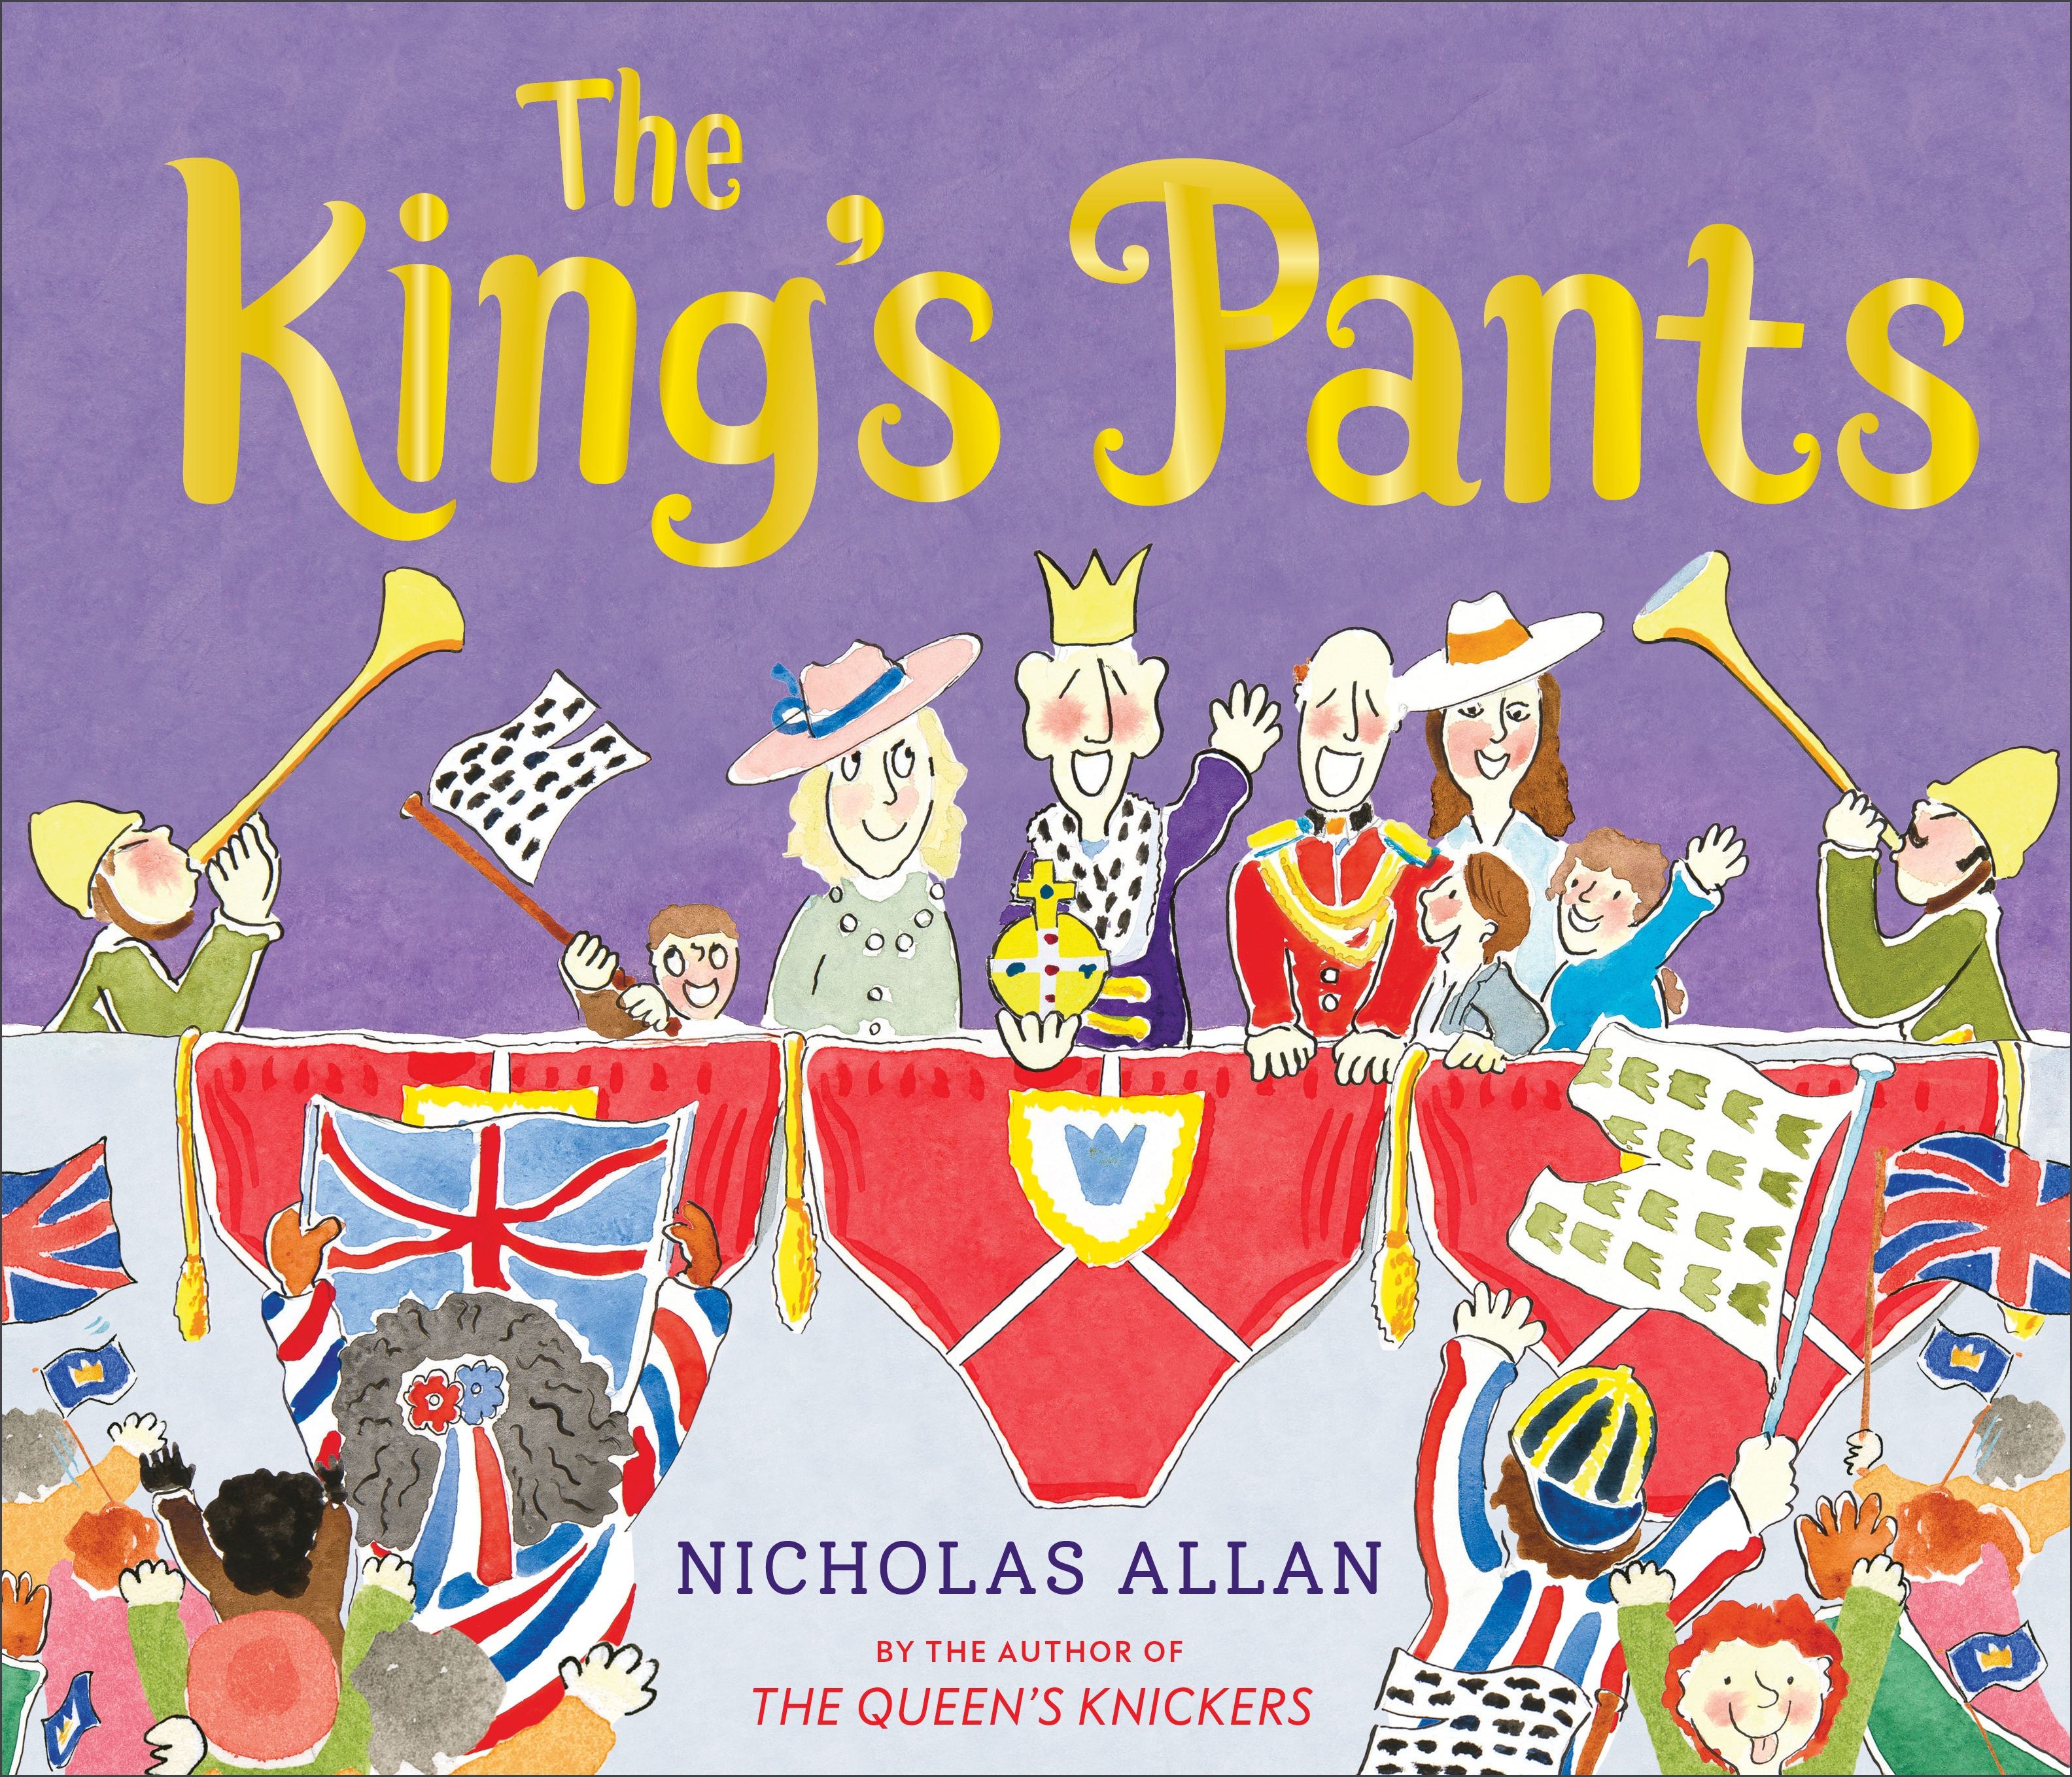 The King's Pants